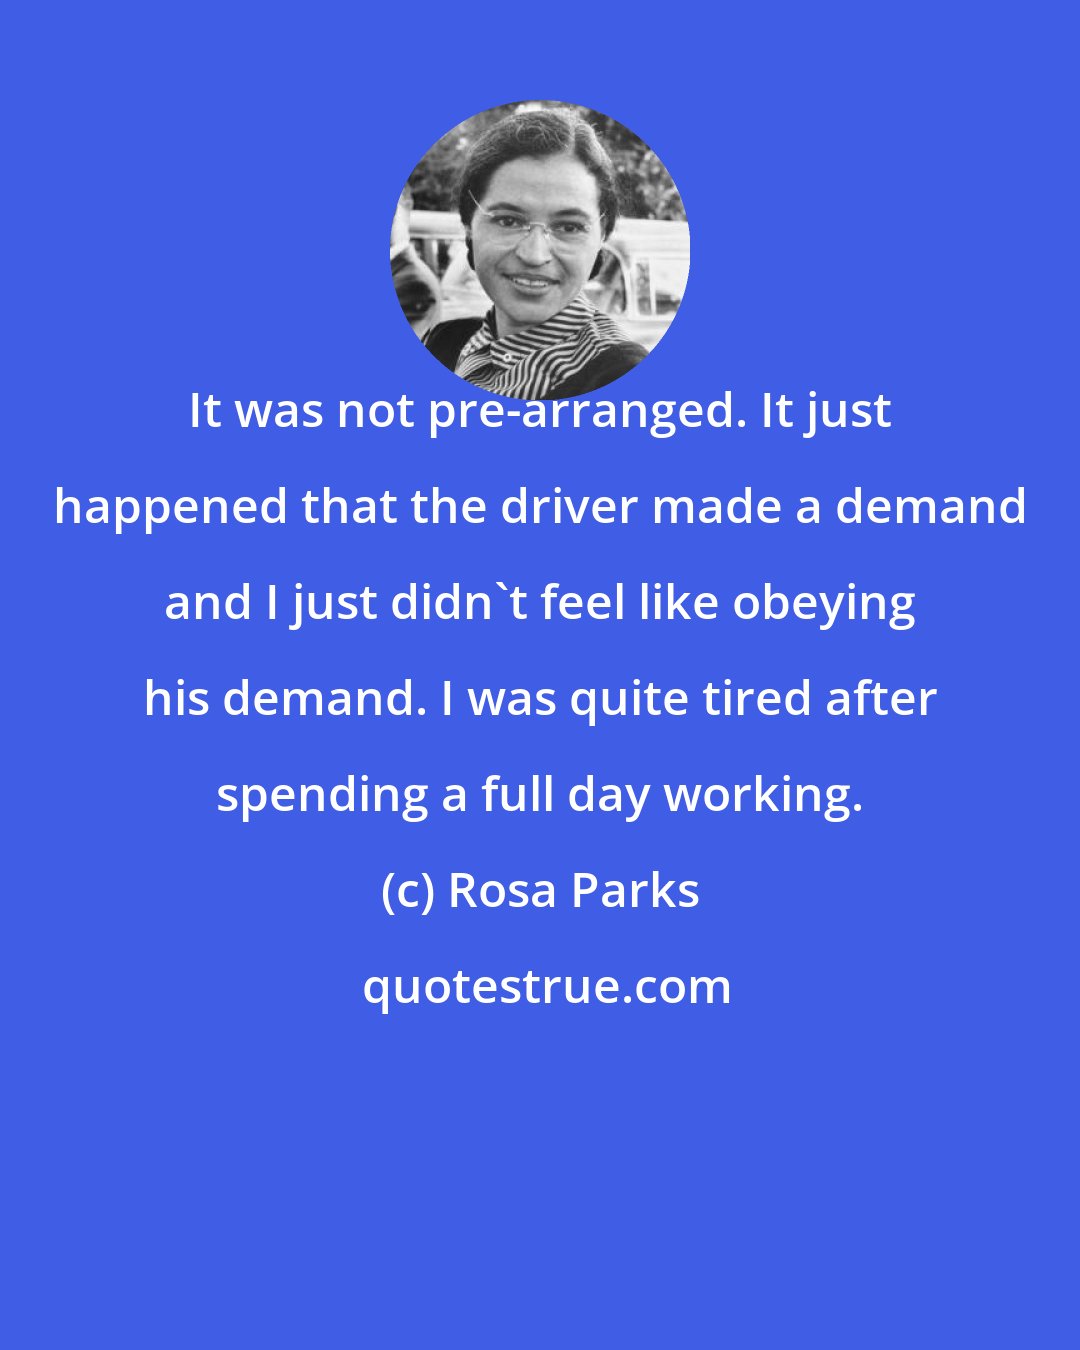 Rosa Parks: It was not pre-arranged. It just happened that the driver made a demand and I just didn't feel like obeying his demand. I was quite tired after spending a full day working.